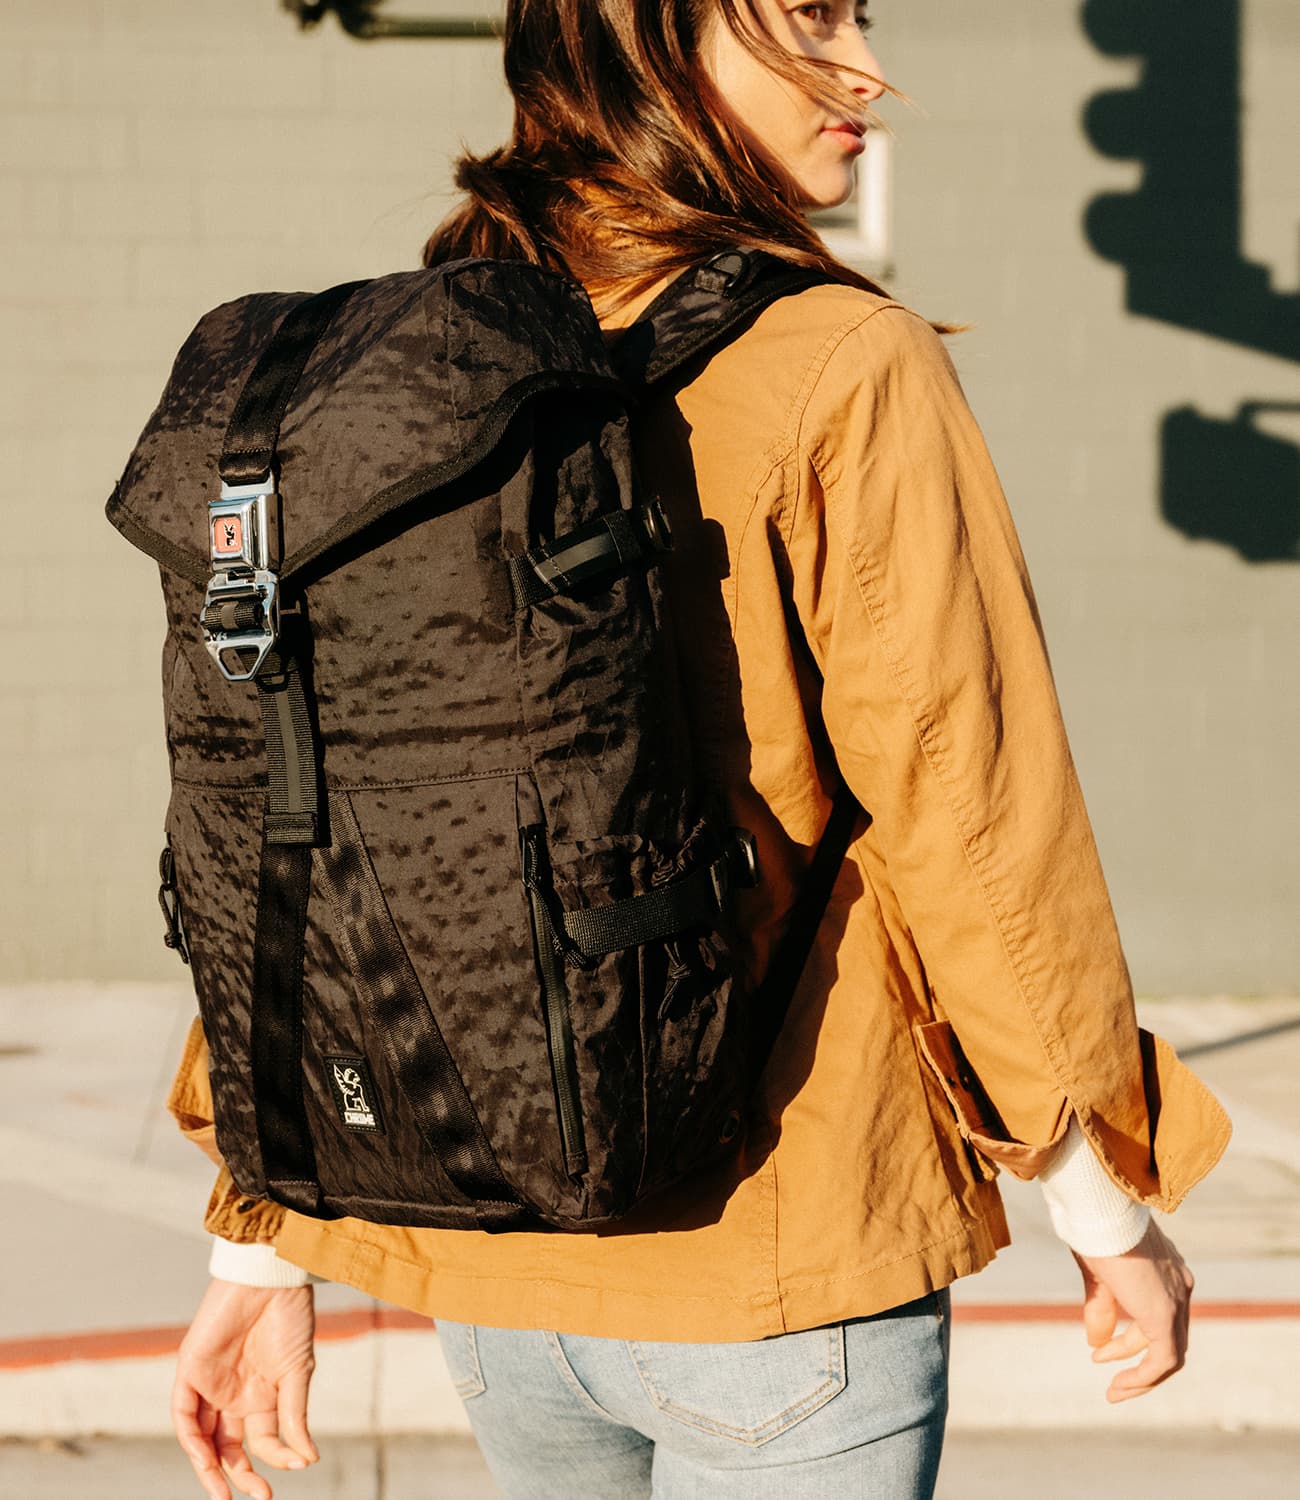 Tensile Ruckpack in black worn by a woman mobile image size